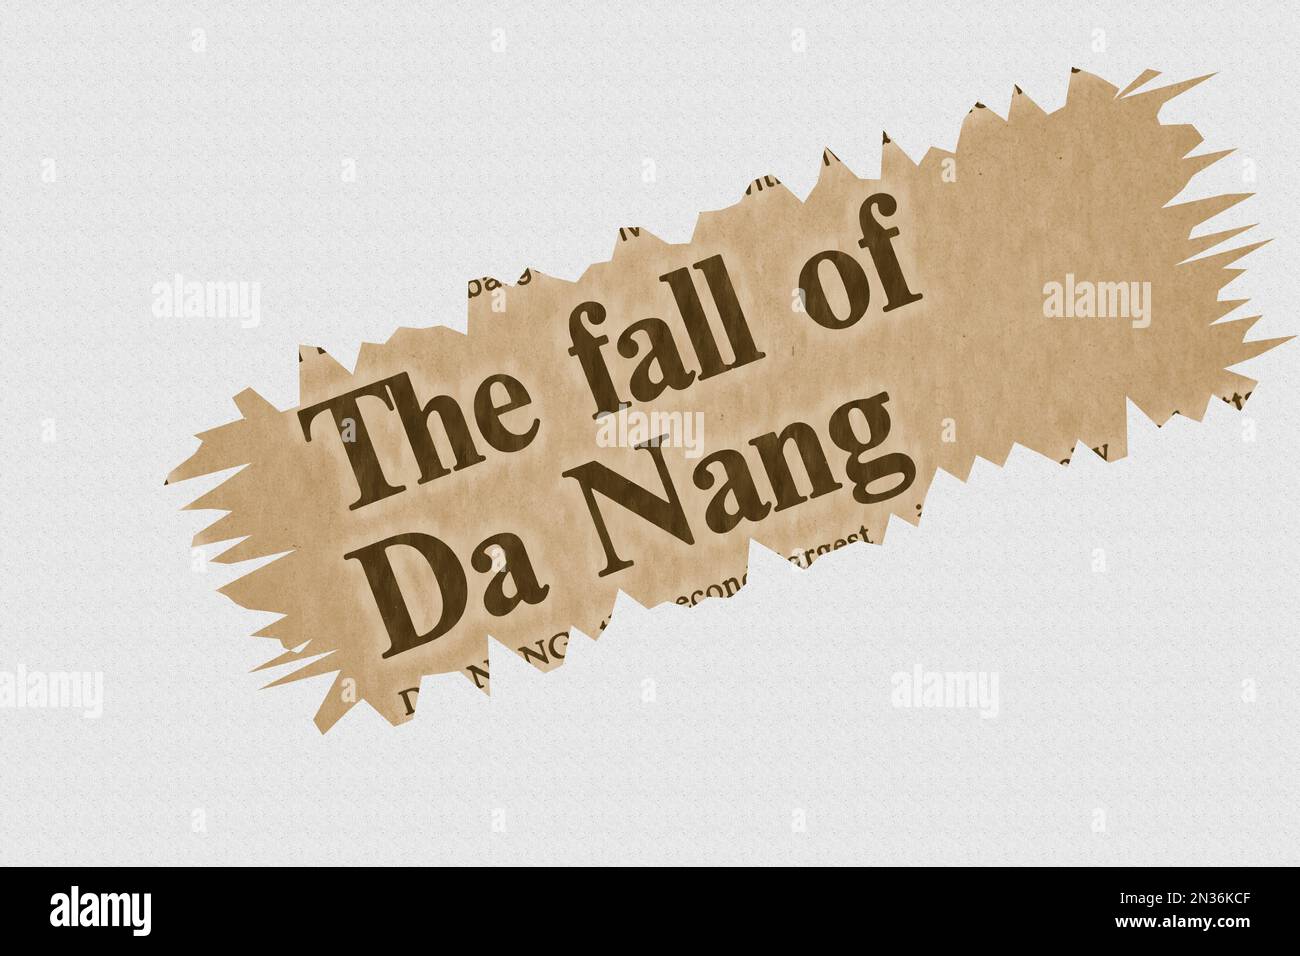 The fall of Da Nang - news story from 1975 newspaper headline article title highlighted Stock Photo